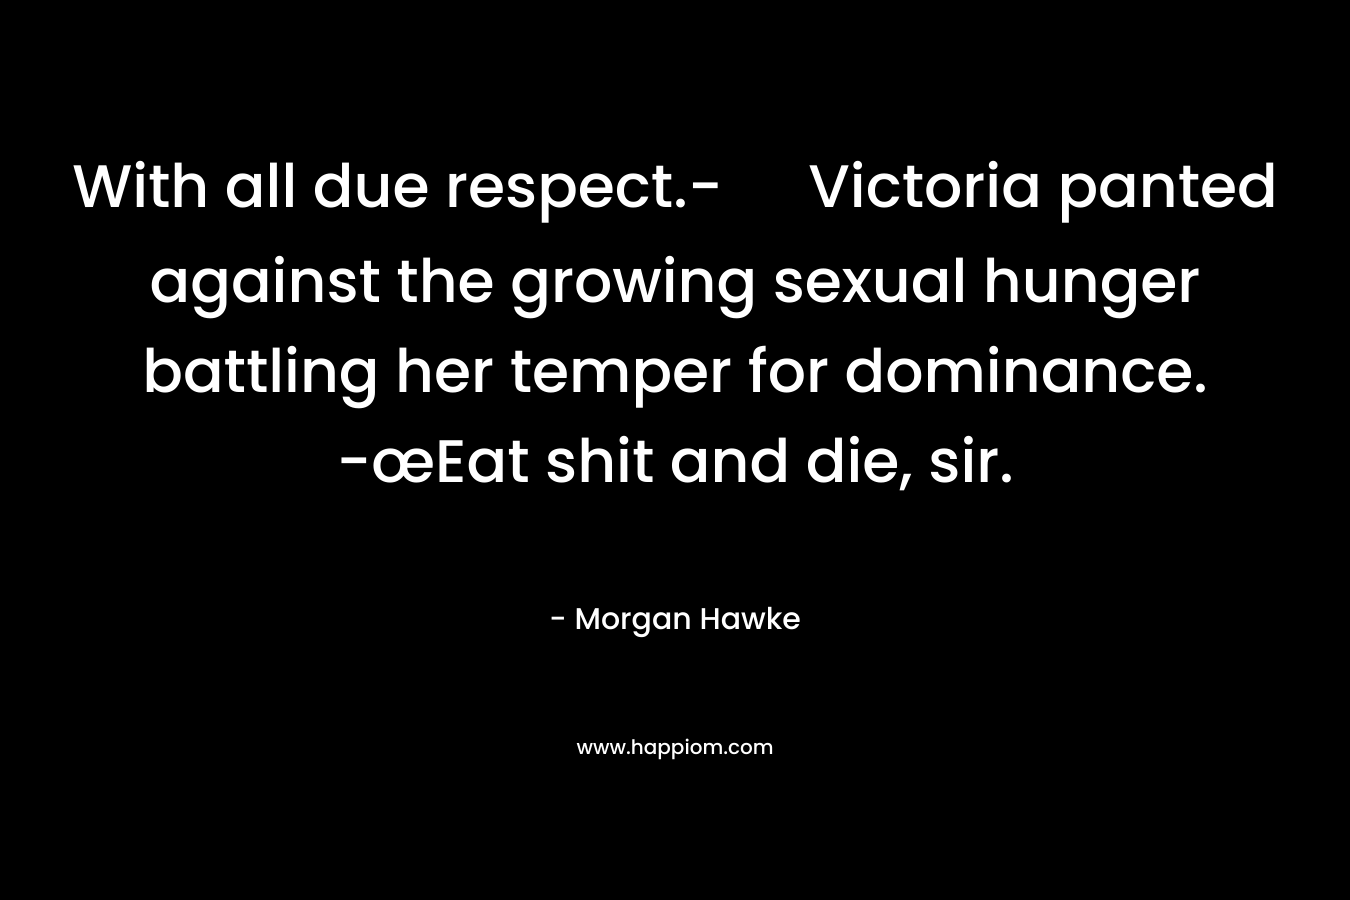 With all due respect.- Victoria panted against the growing sexual hunger battling her temper for dominance. -œEat shit and die, sir.